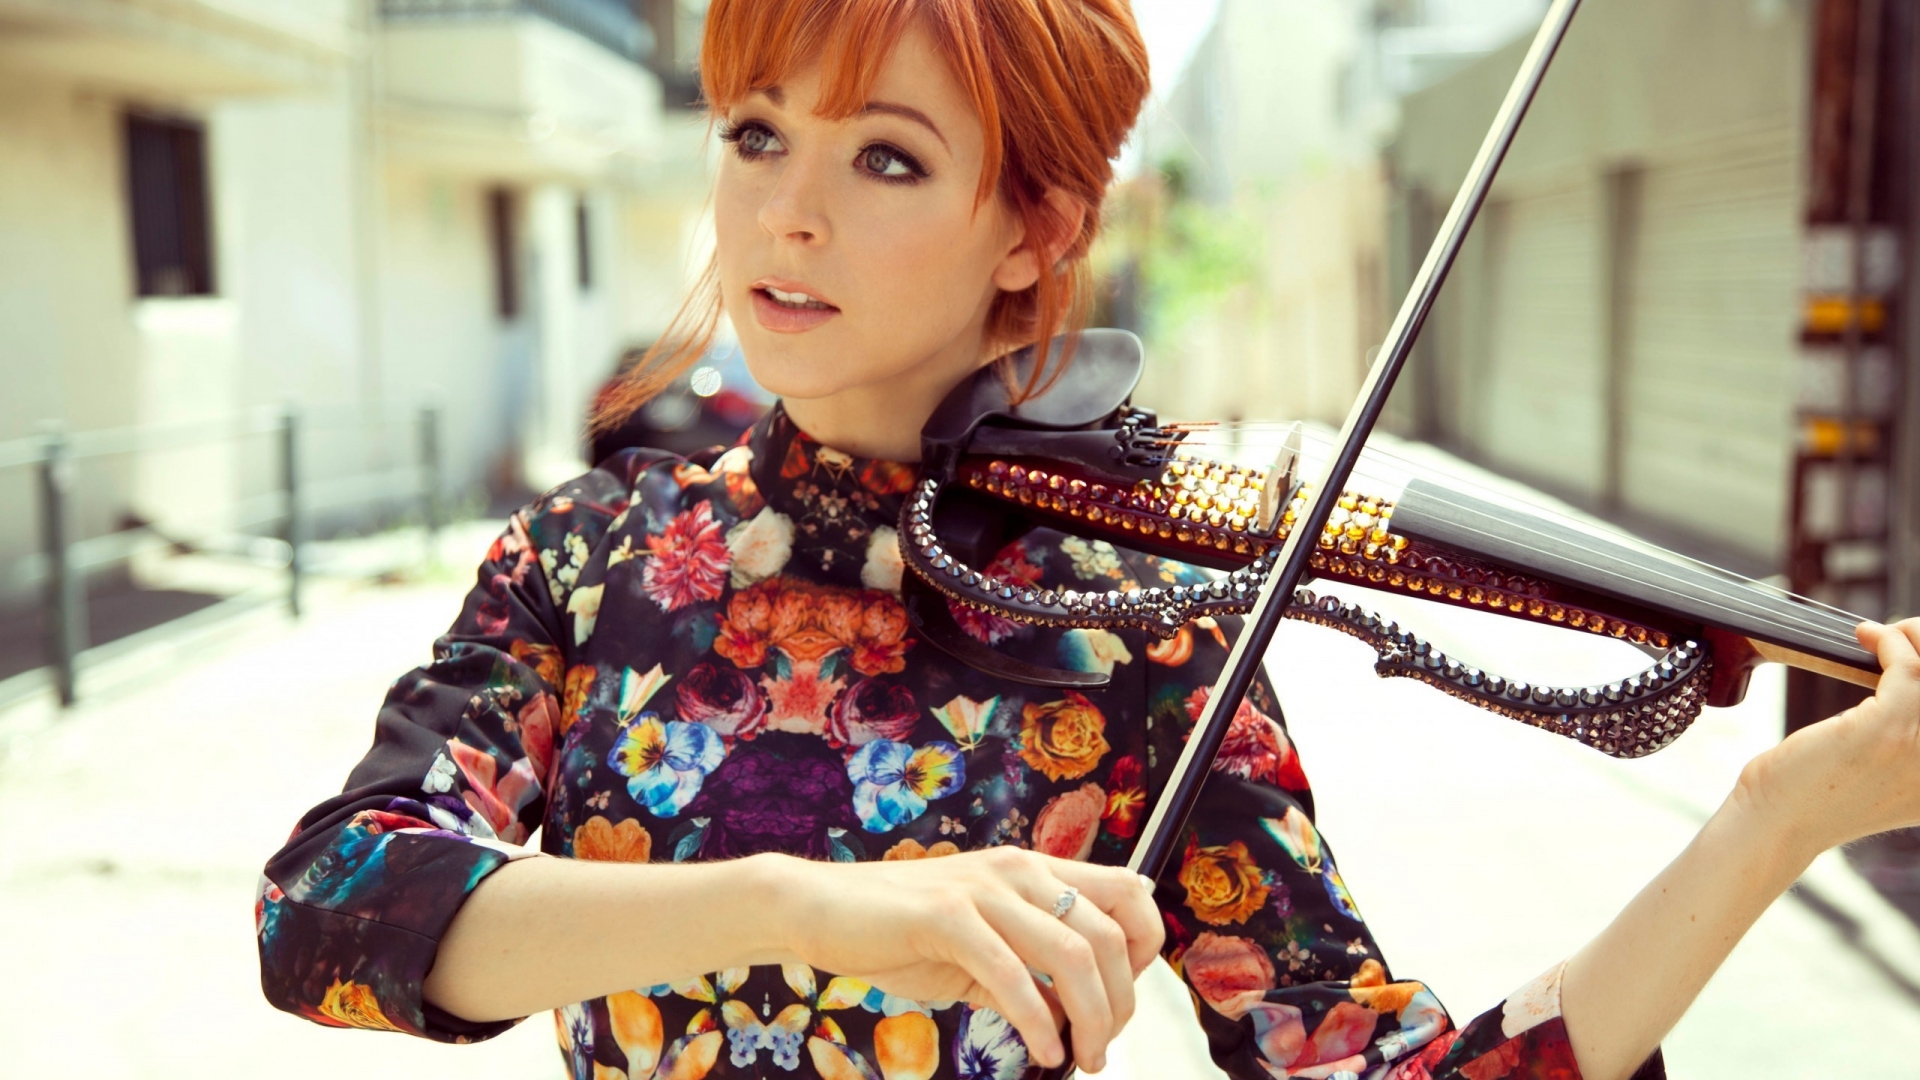 Lindsey Stirling Beautiful for 1920 x 1080 HDTV 1080p resolution